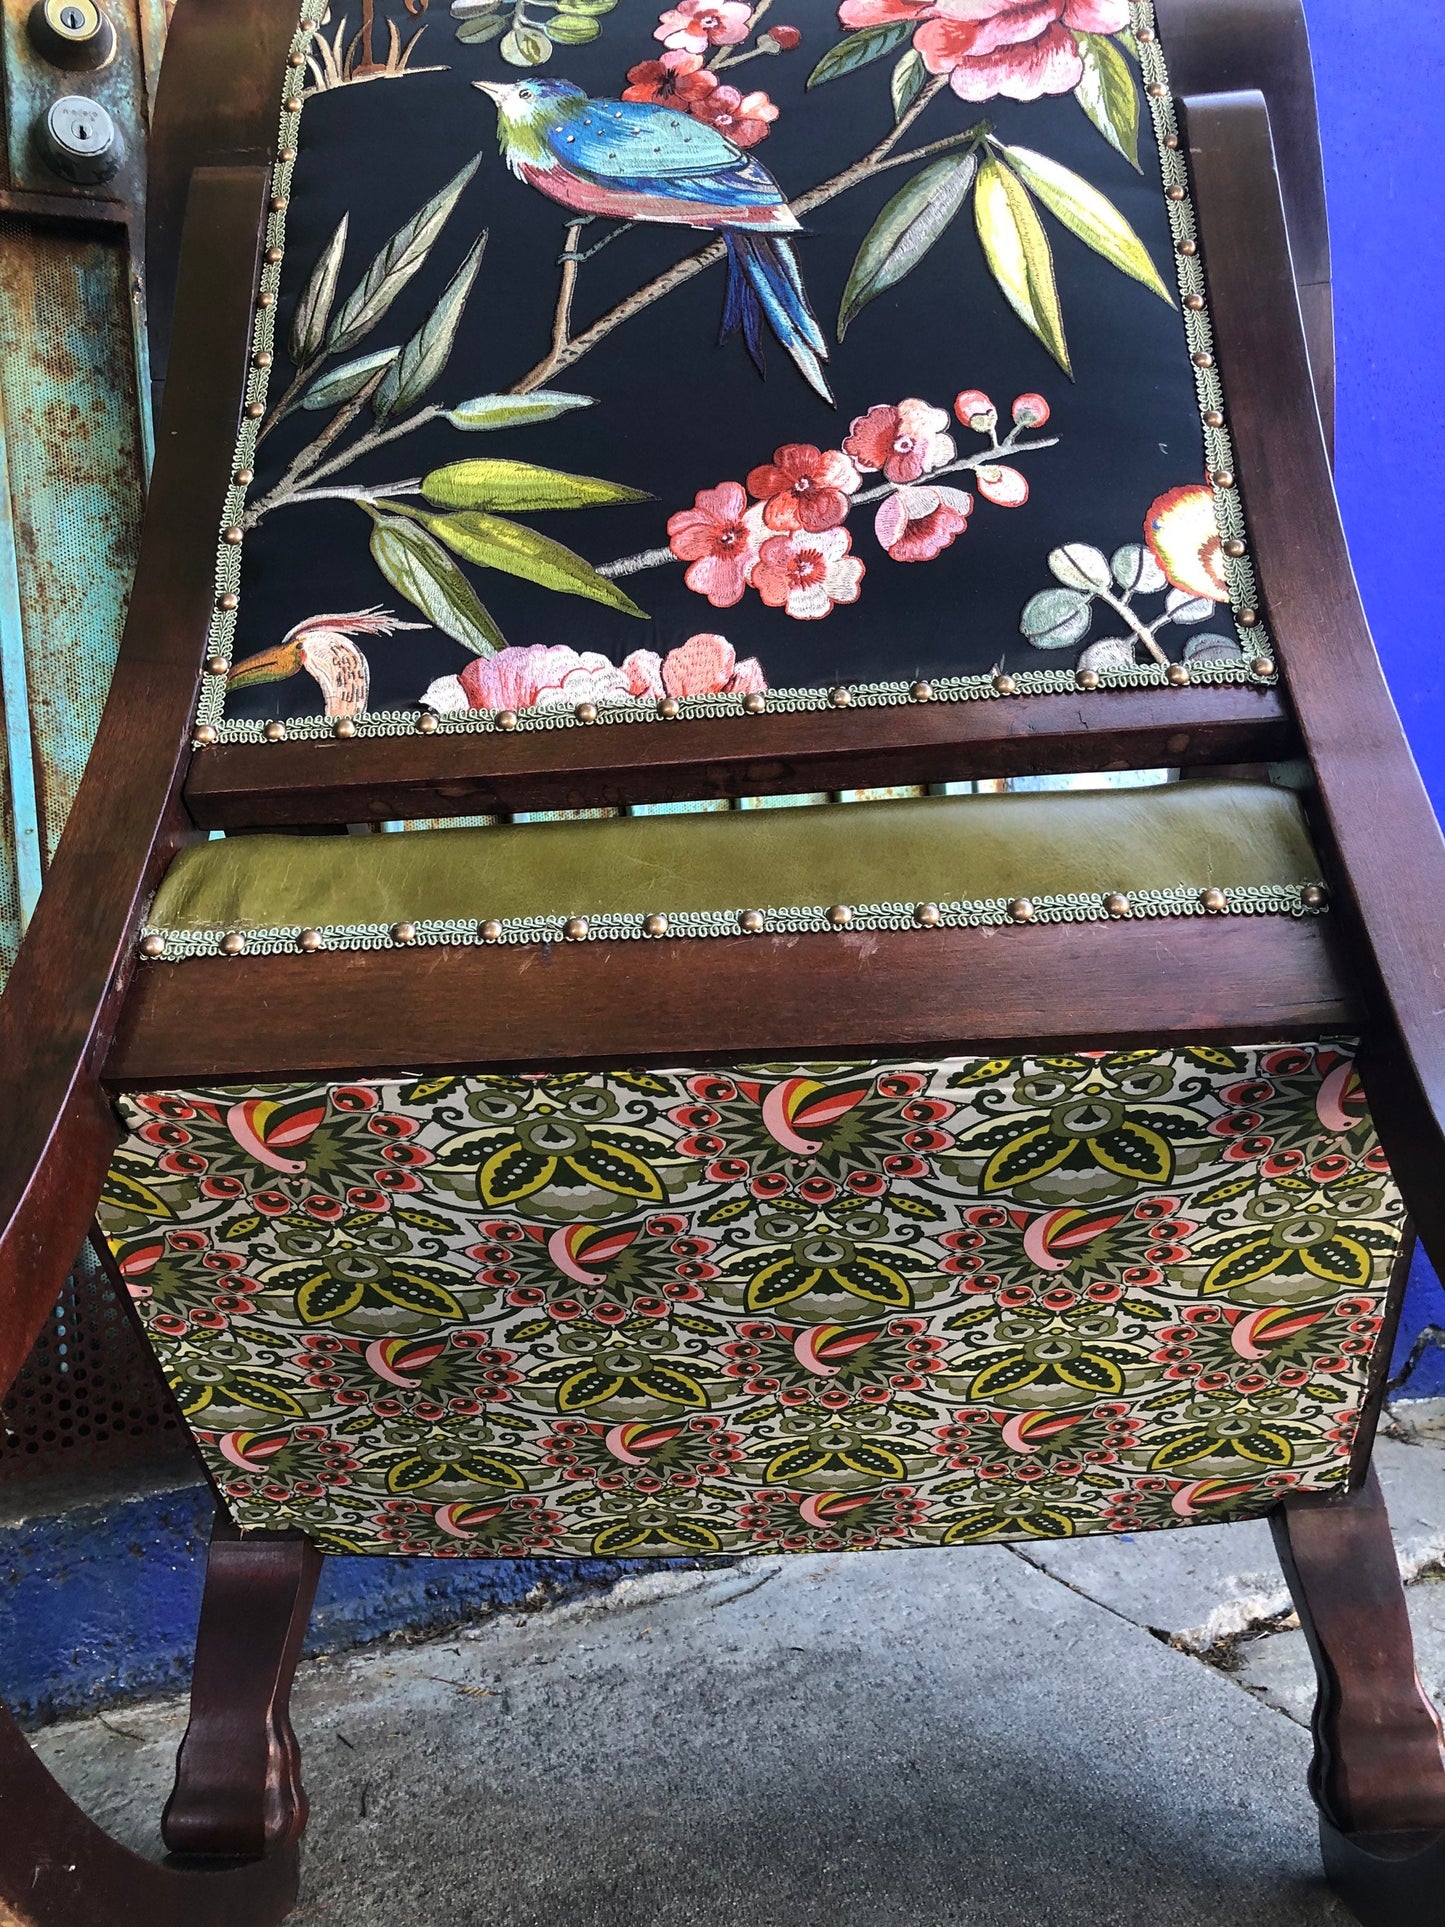 Repurposed Recycled Victorian Wooden Rocking Chair with Leather and Embroidered Textile